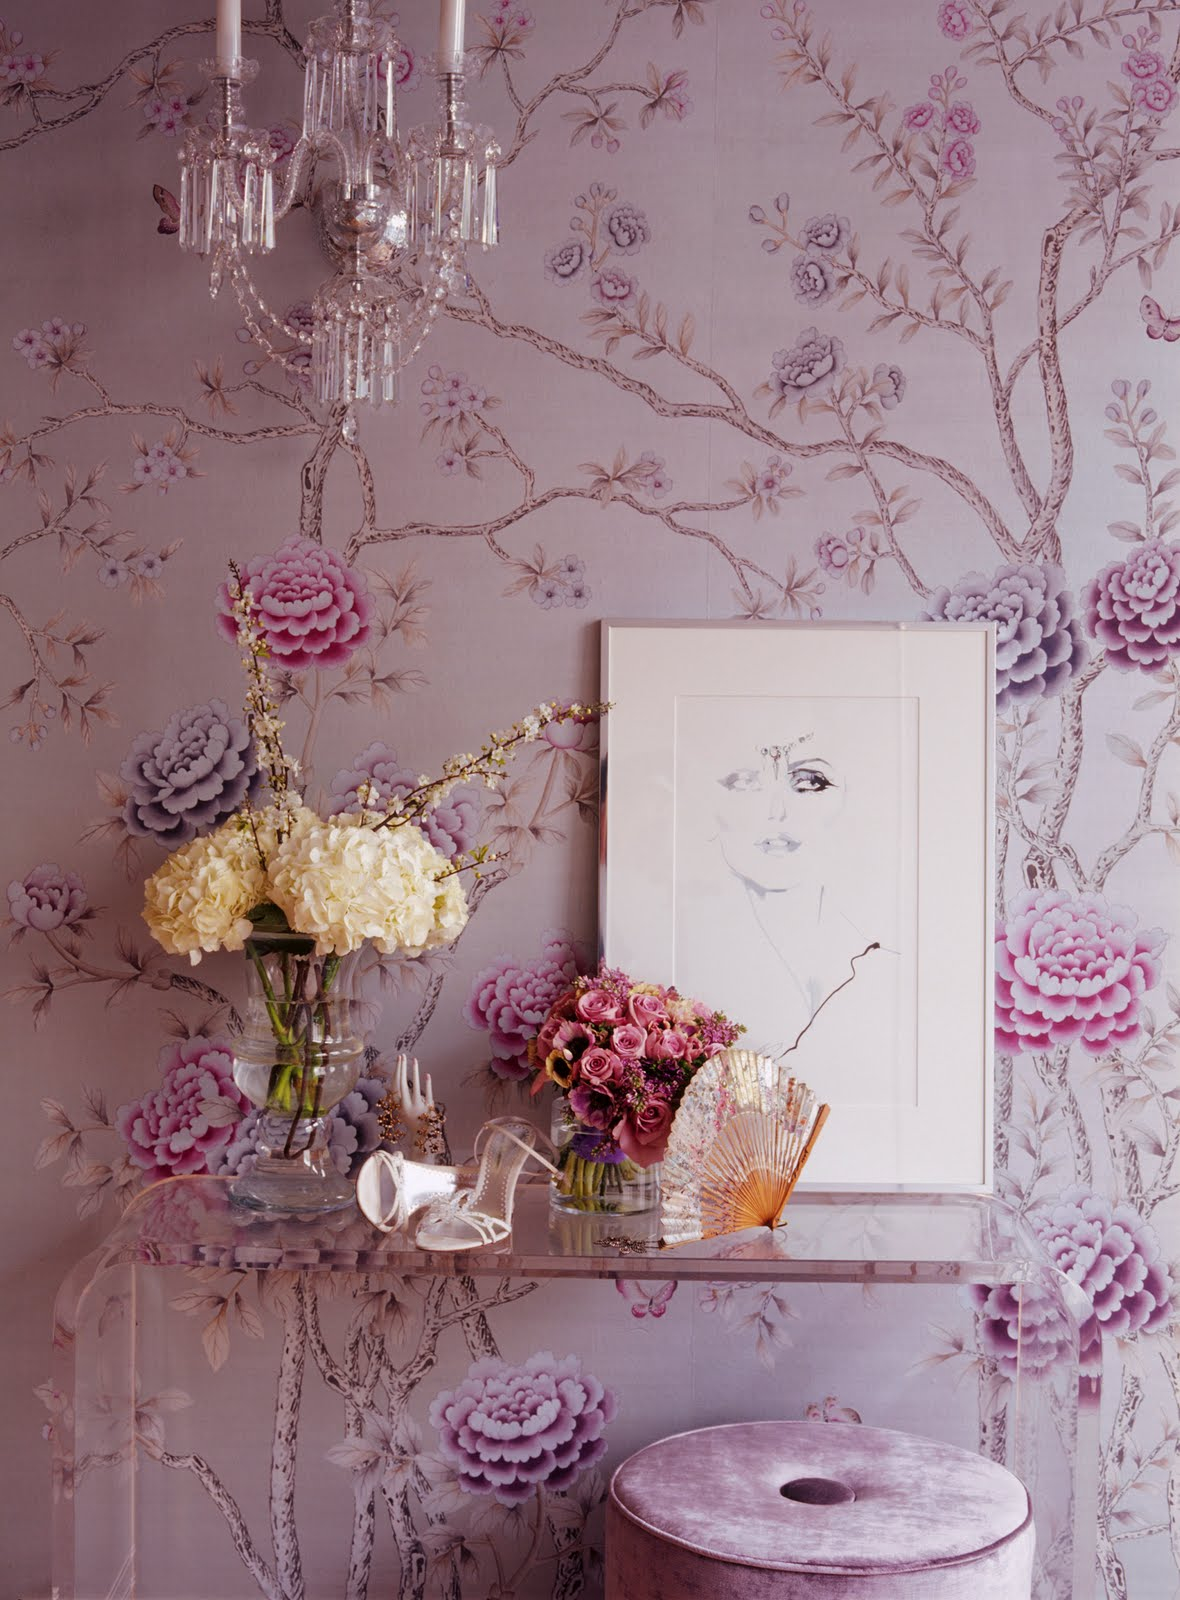 De Gournay Hand Painted Wallpaper On The Wall